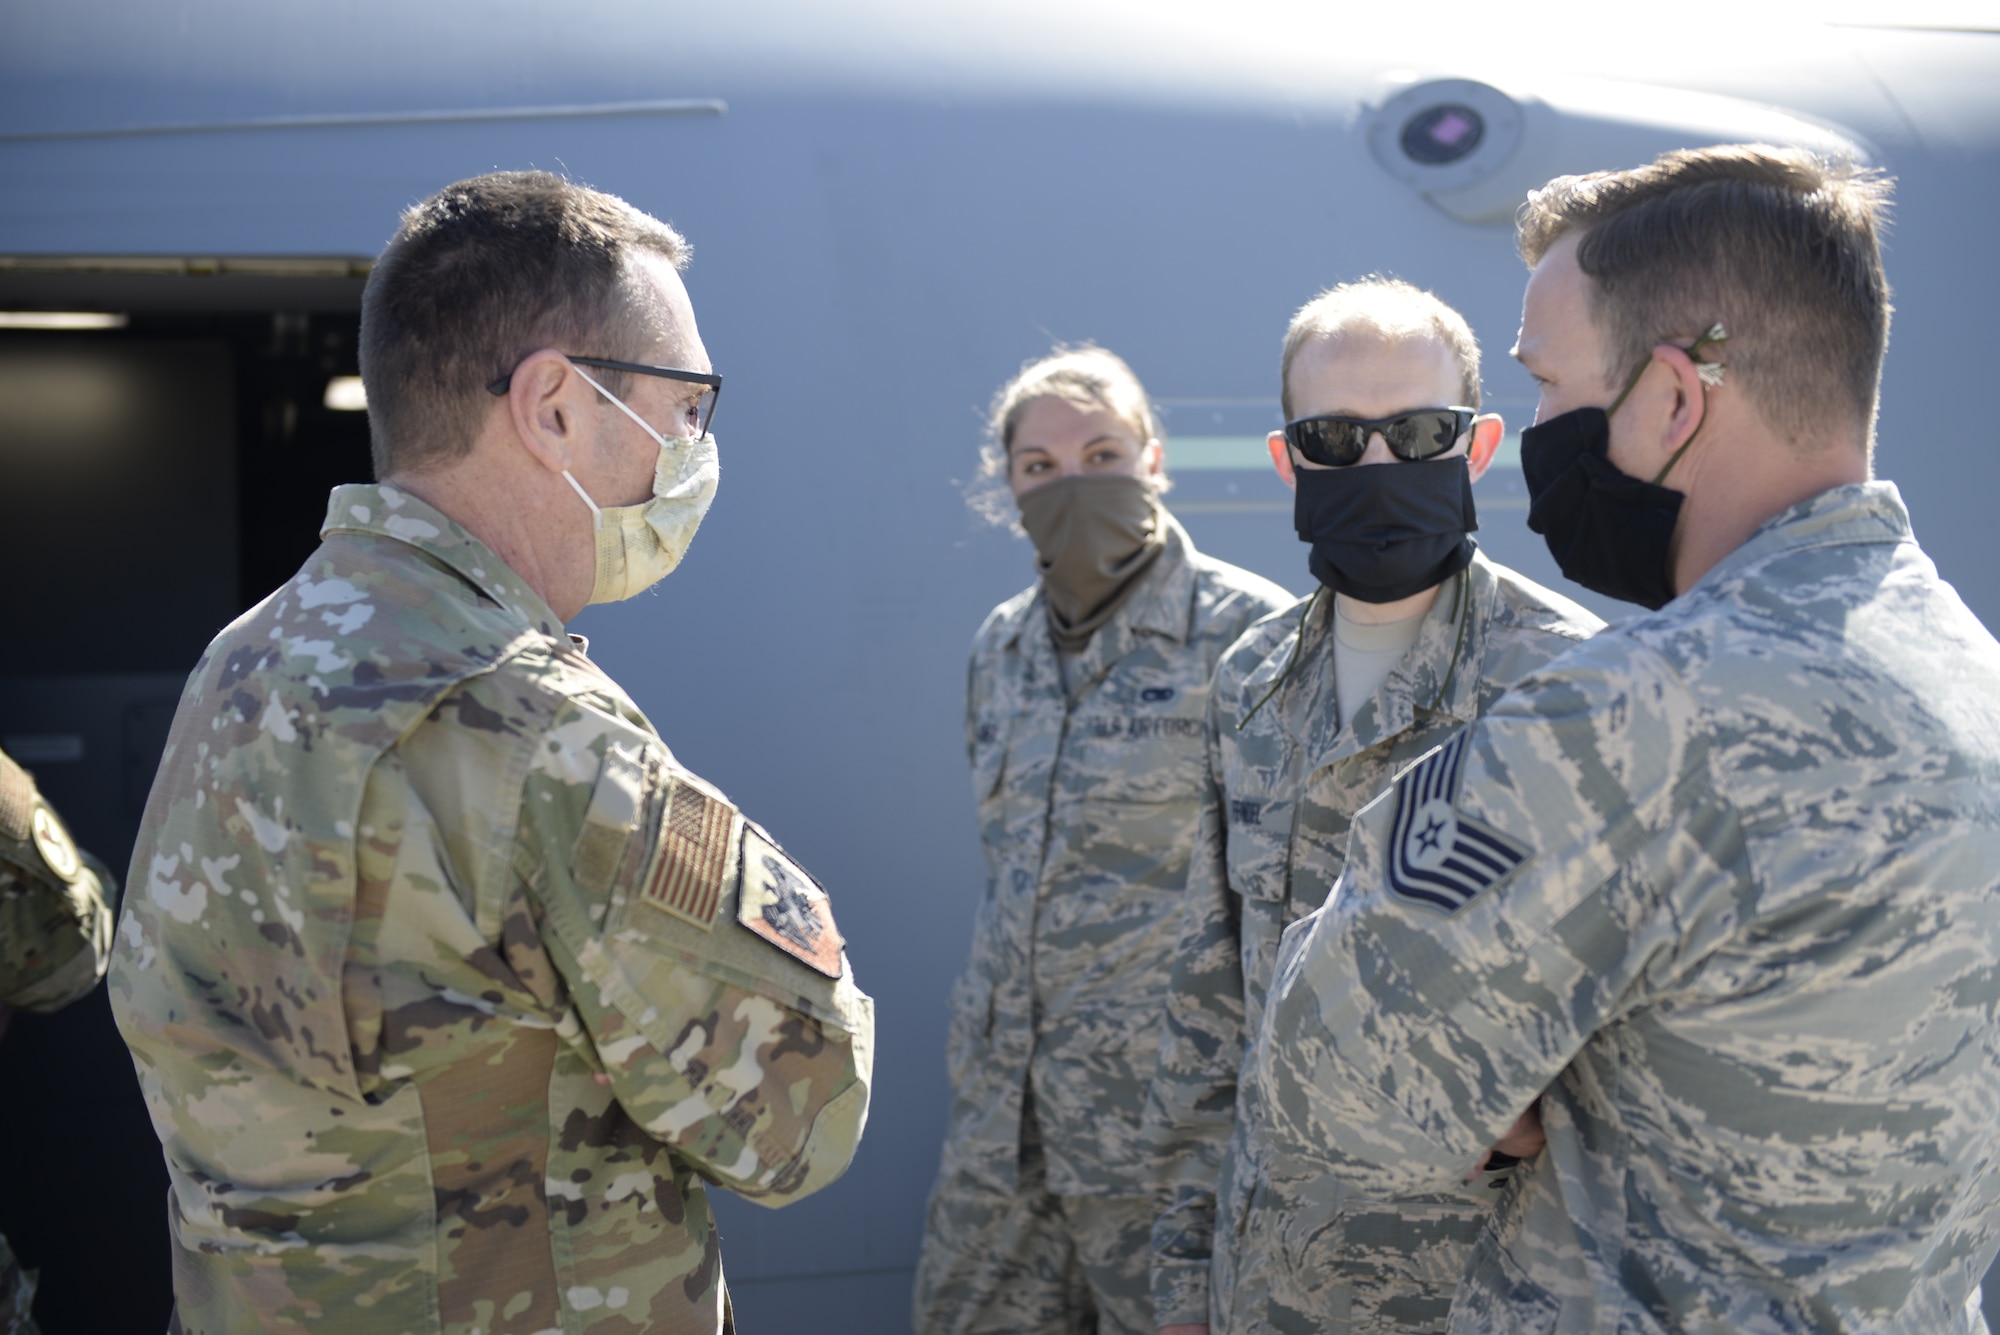 Gen. Joseph L. Lengyel, the Chief of the National Guard Bureau, talks with (from left to right) Senior Airman Kayla Orner, Tech. Sgt. Ariel Feindel and Tech. Sgt. Nicholas Johnston at Pease Air National Guard Base, Newington, N.H., May 27, 2020. The general presented coins to the trio for outstanding performance. (U.S. Air National Guard photo by Senior Master Sgt. Timm Huffman)